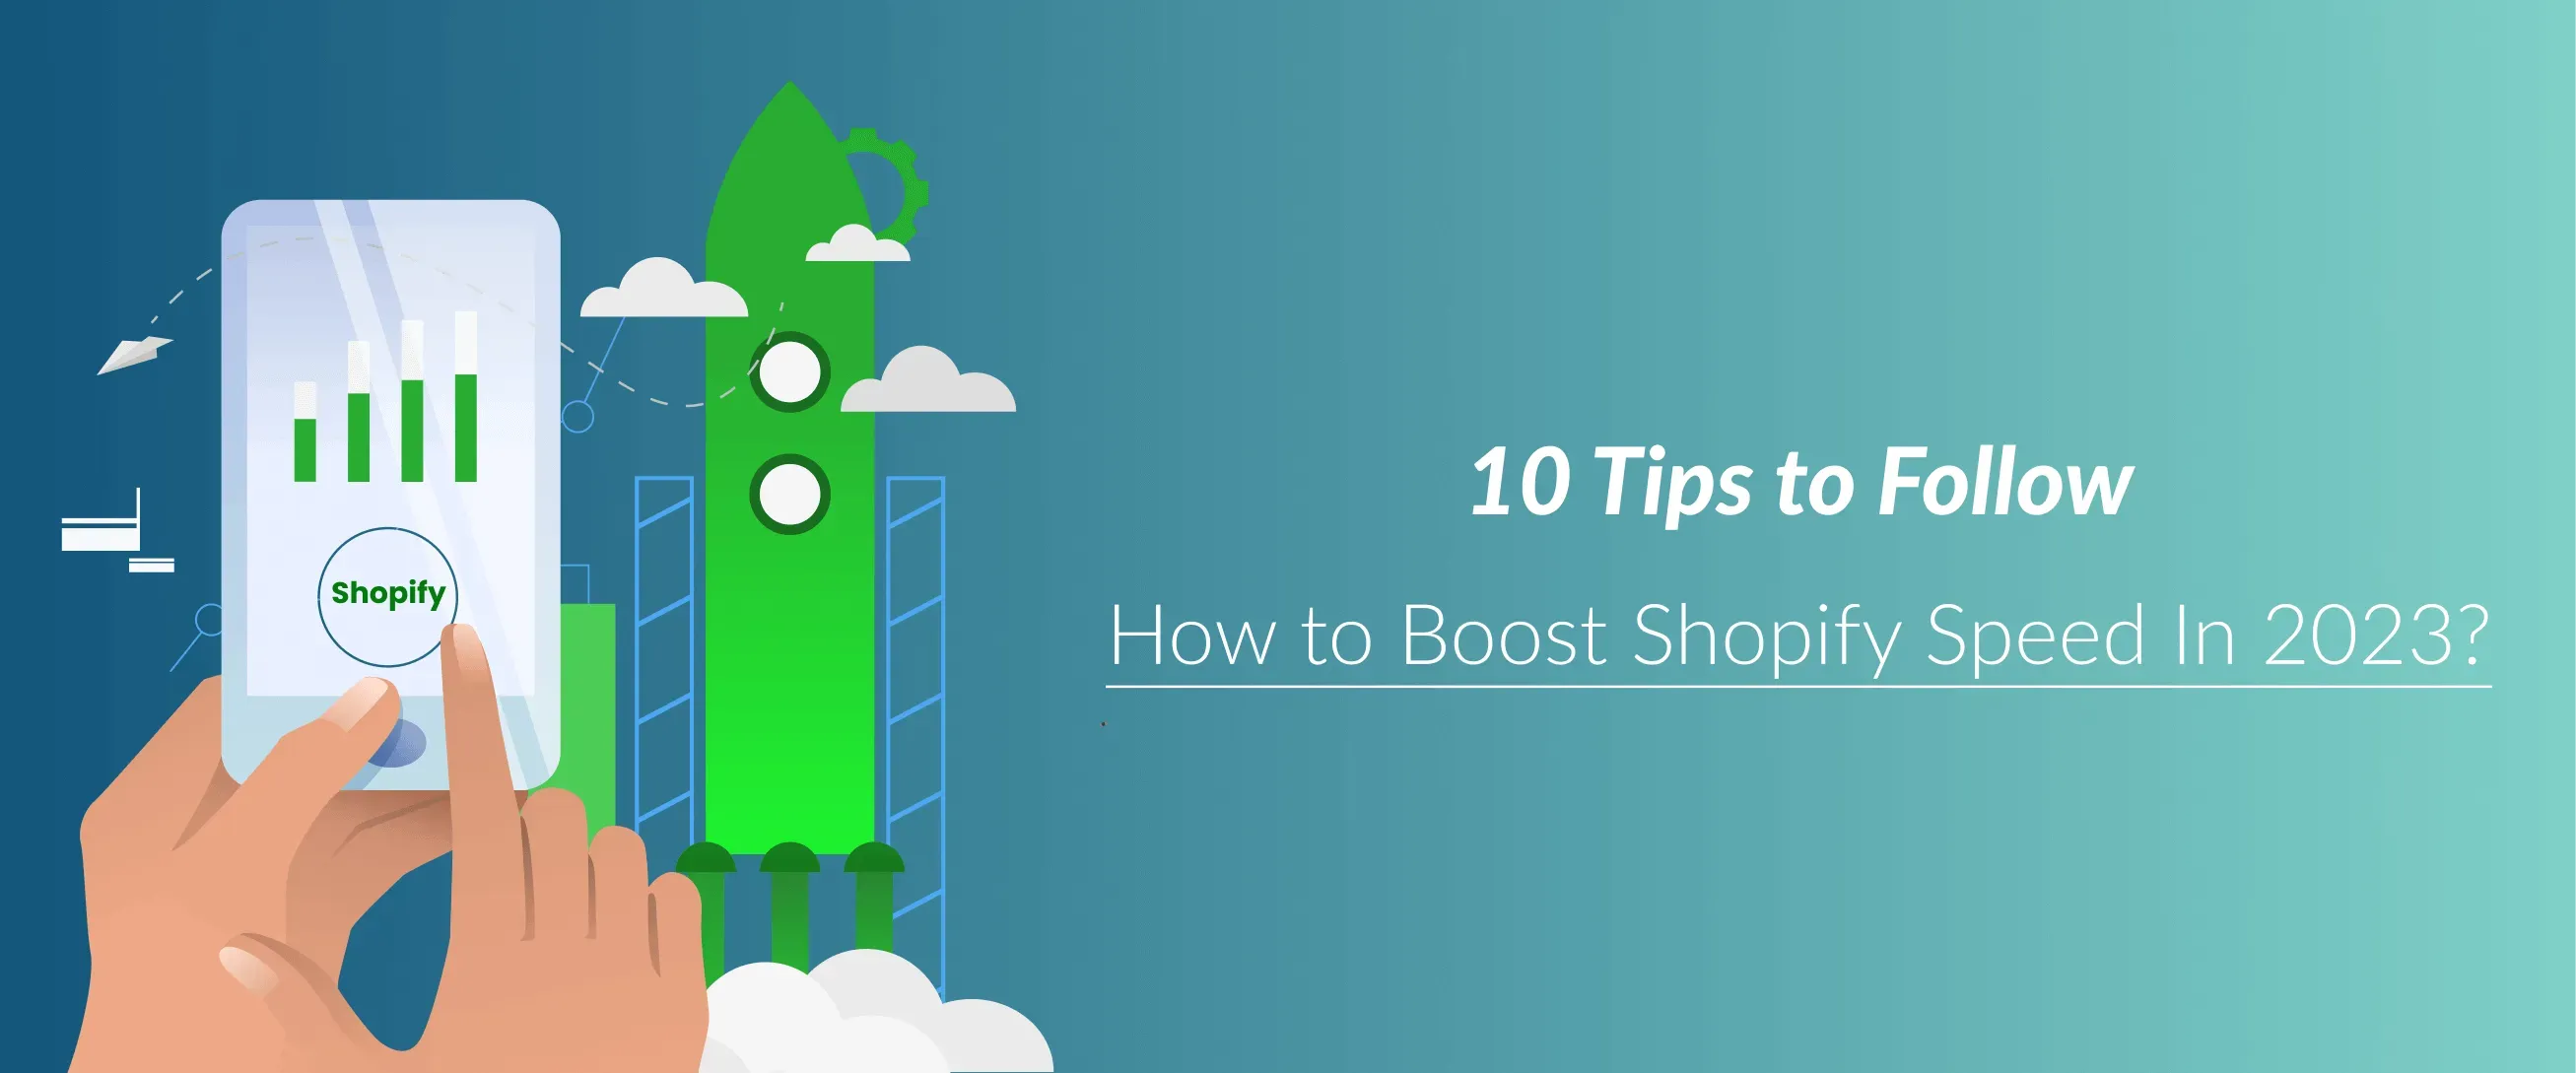 How-to-Boost-Shopify-Speed-In-2023_-10-Tips-to-Follows